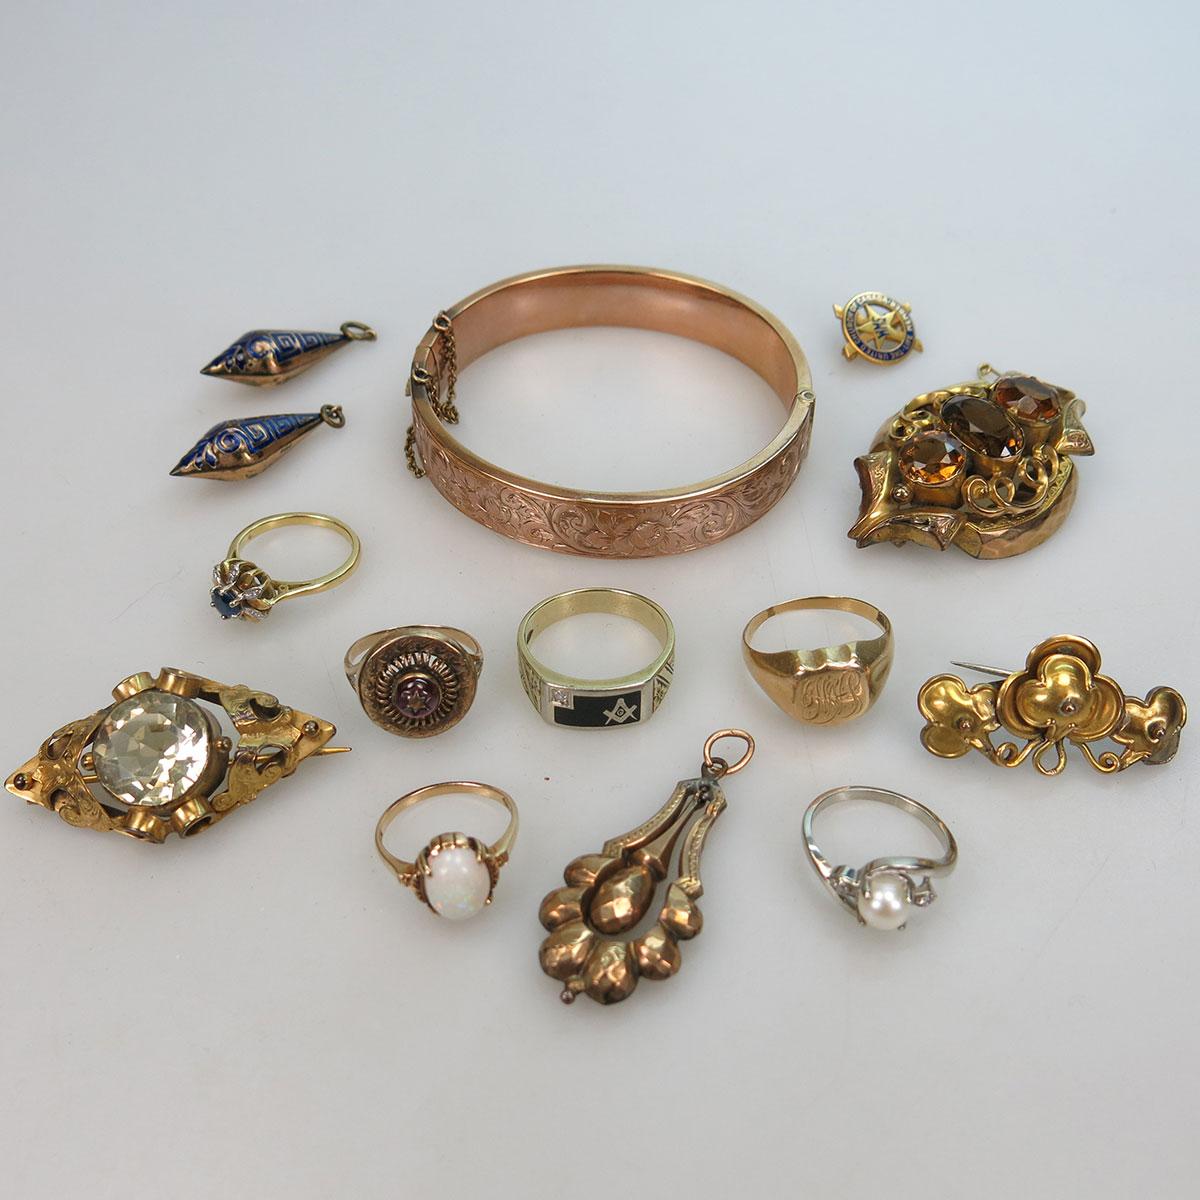 Quantity Of Various Gold And Gold-Filled Jewellery